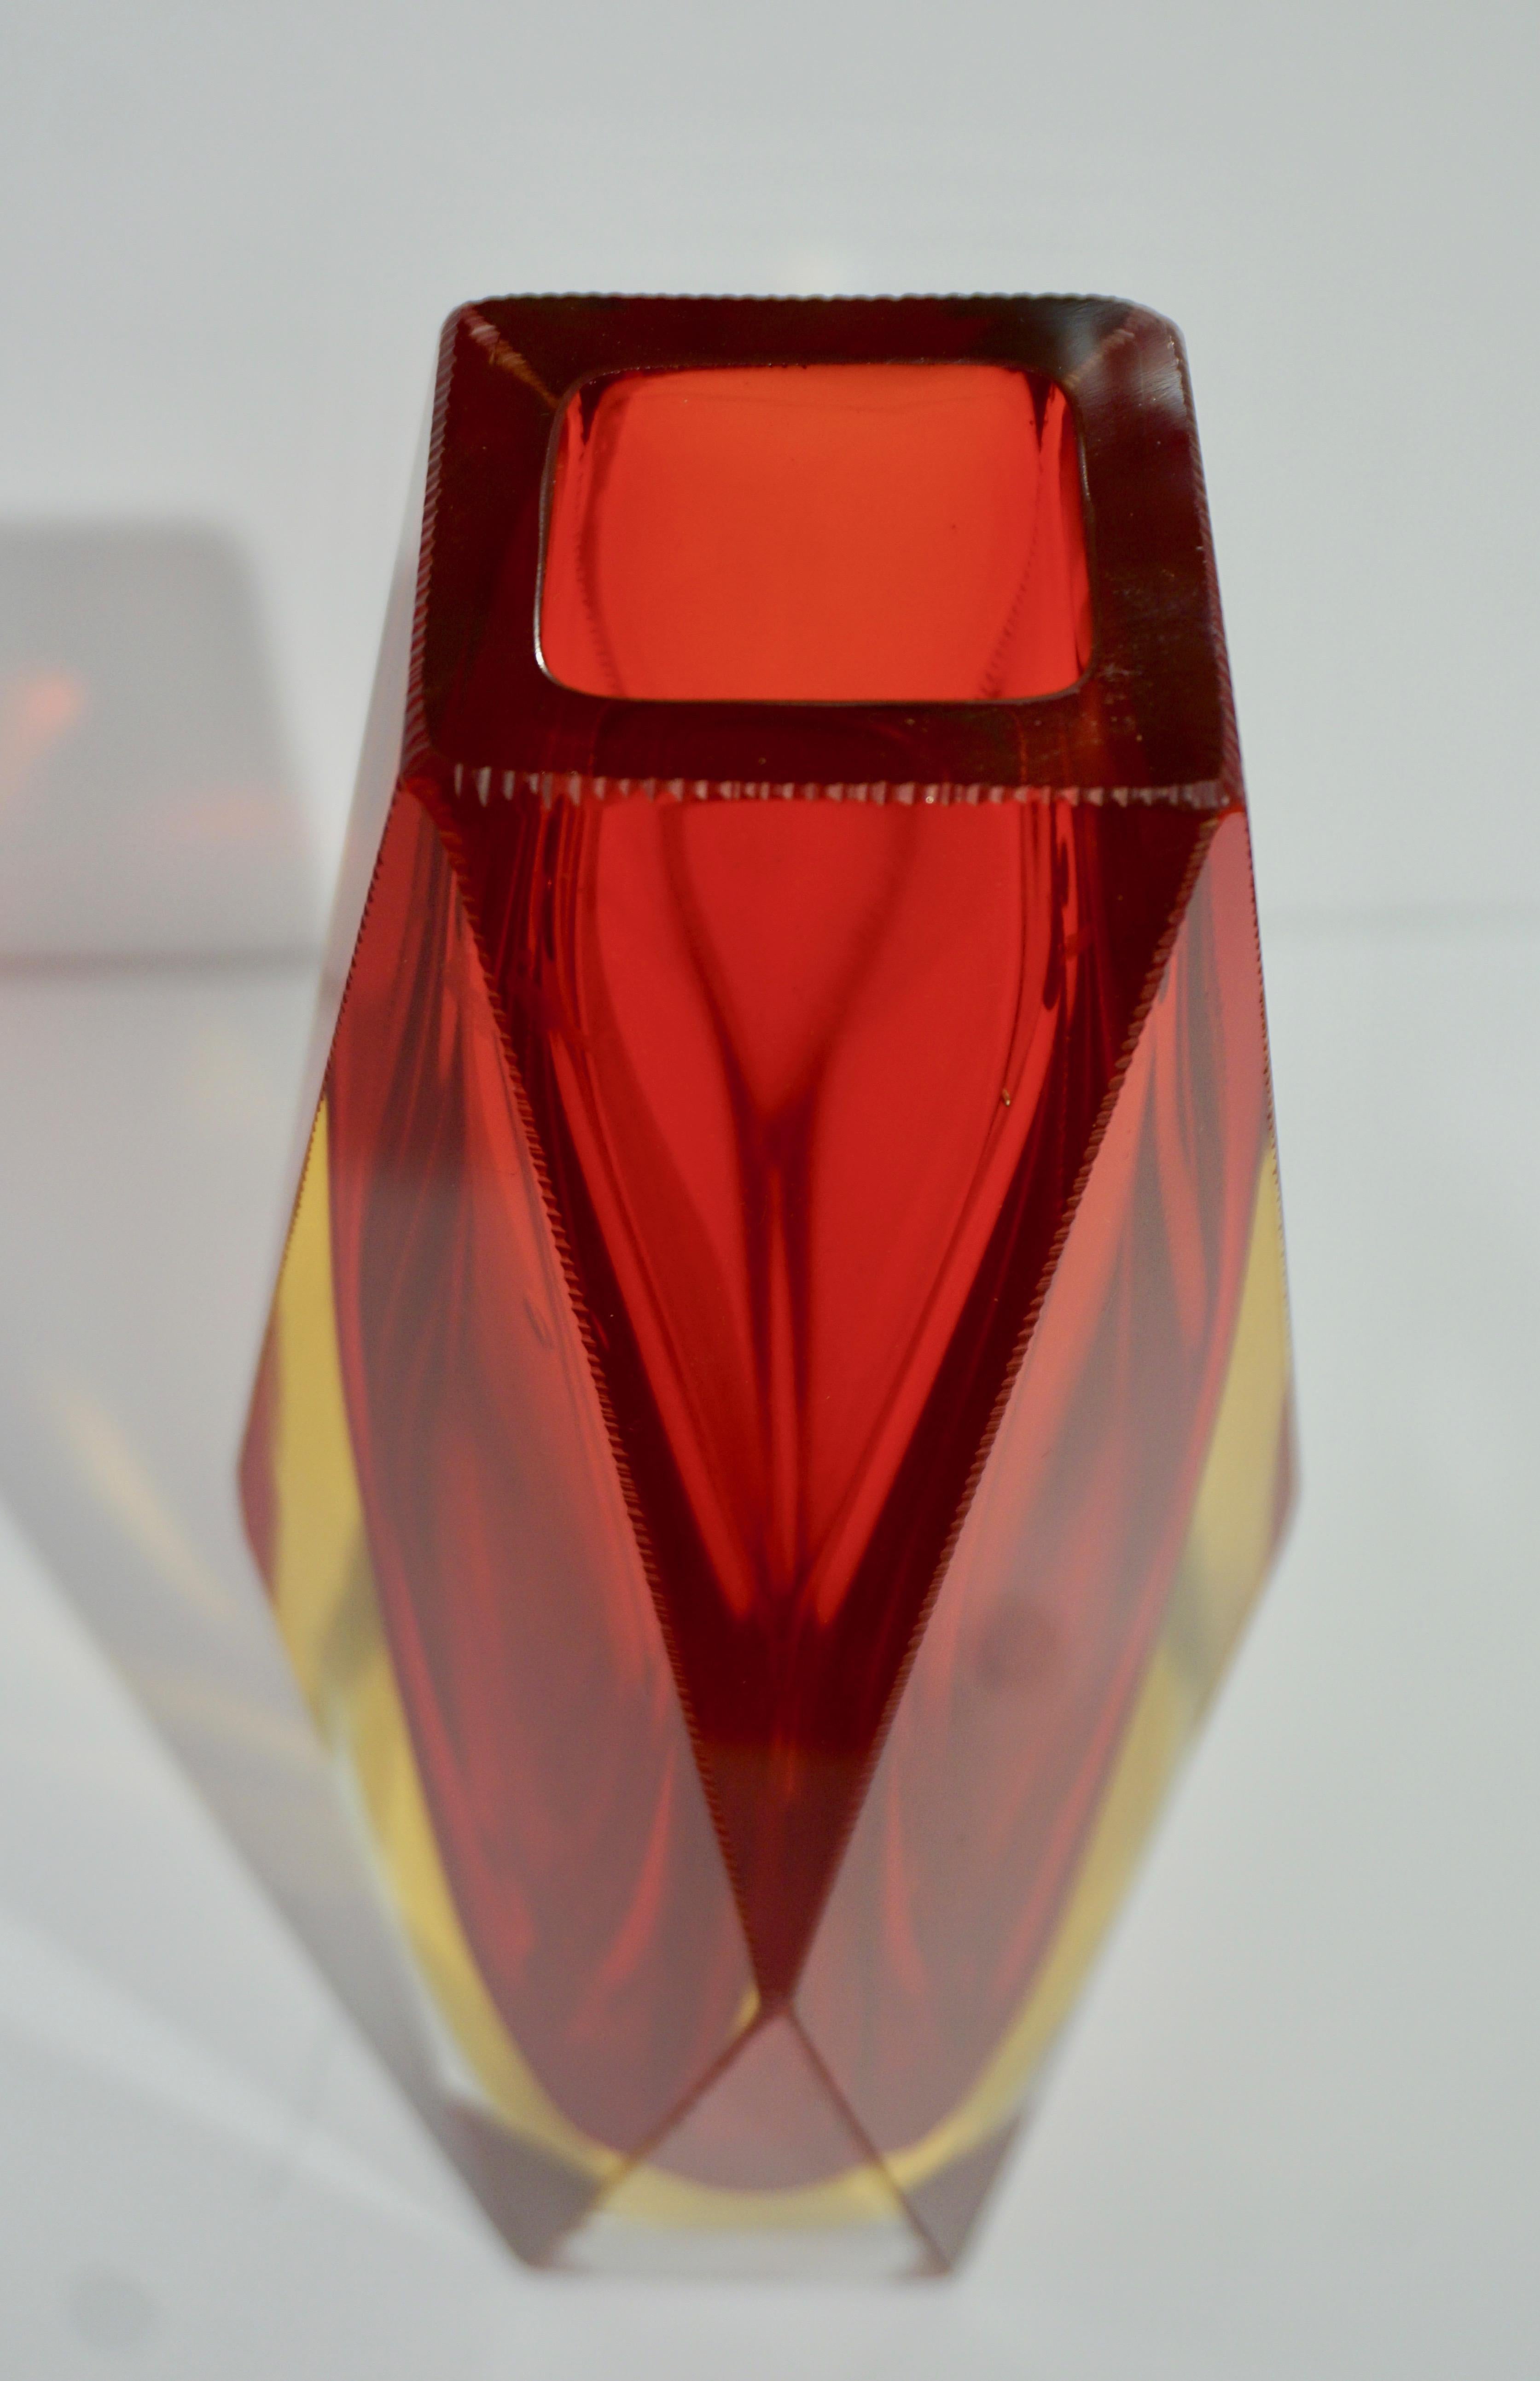 Etched 1950s Italian Vintage Seguso Yellow Red Crystal Murano Glass Multi Faceted Vase